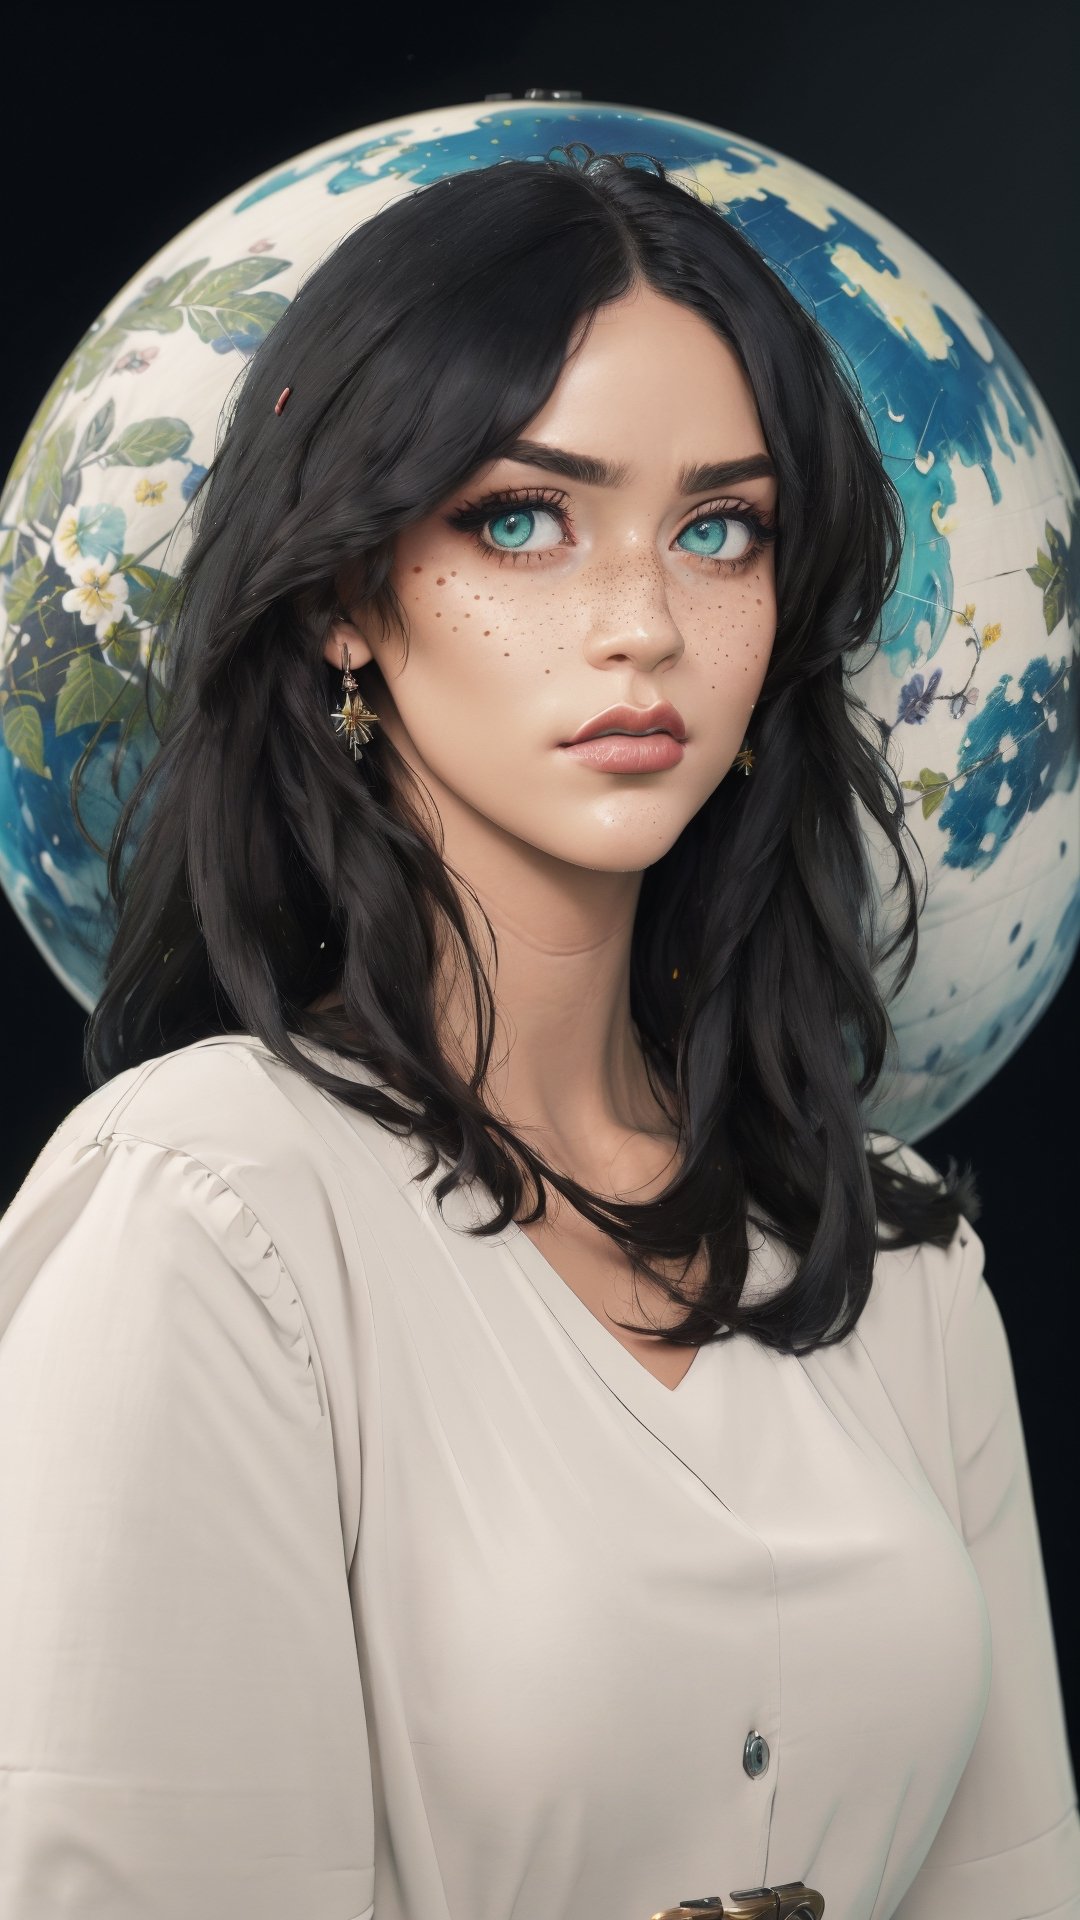 (4k), (masterpiece), (best quality), (extremely complex), (realistic), (sharp focus), (cinematic lighting), (extremely detailed), (epic), A close-up portrait of a woman chubby, serious look, deep look, incredibly detailed hand, long black hair, bangs, mint green eyes, freckles on face, white shirt with jacket on top, black jeans, curvy body, full body, detailed face, perfect eyes, Detailed hands, Mix of fantasy and realism. elements, vibrant manga, uhd image, vibrant illustrations, the background is planet earth,mandha